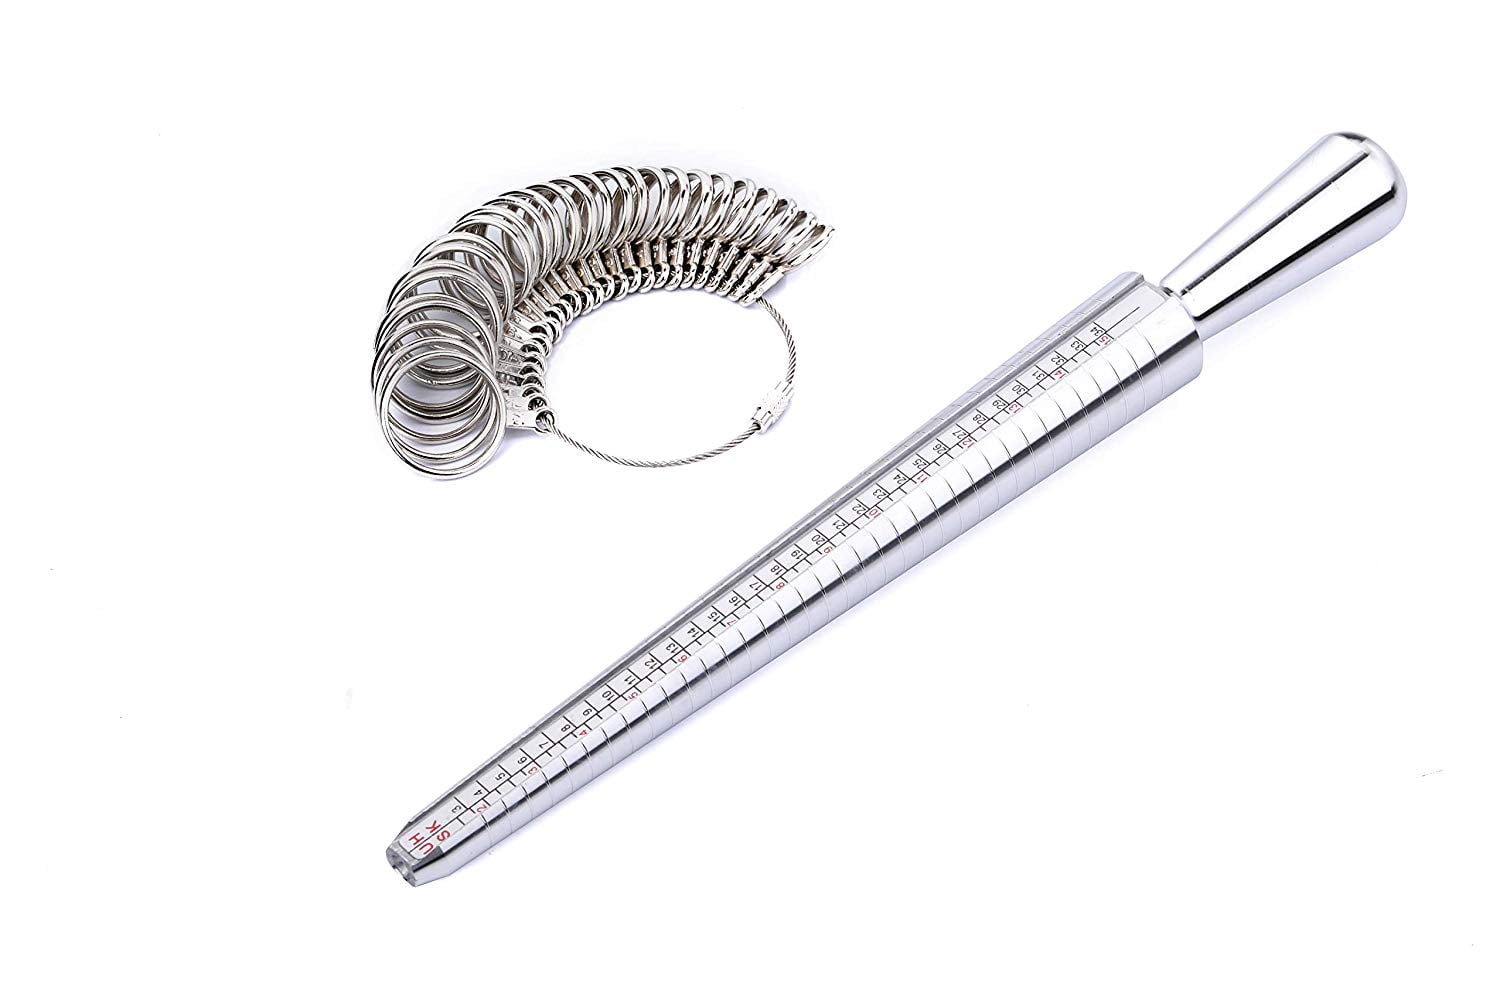 Sherry Ring Size Measuring Tool with Plastic Ring Mandrel & Ring Sizer Guage, Four Size Ring Stick Jewelry Mandrel and Ring Gauge Finger Sizing for Jewelry